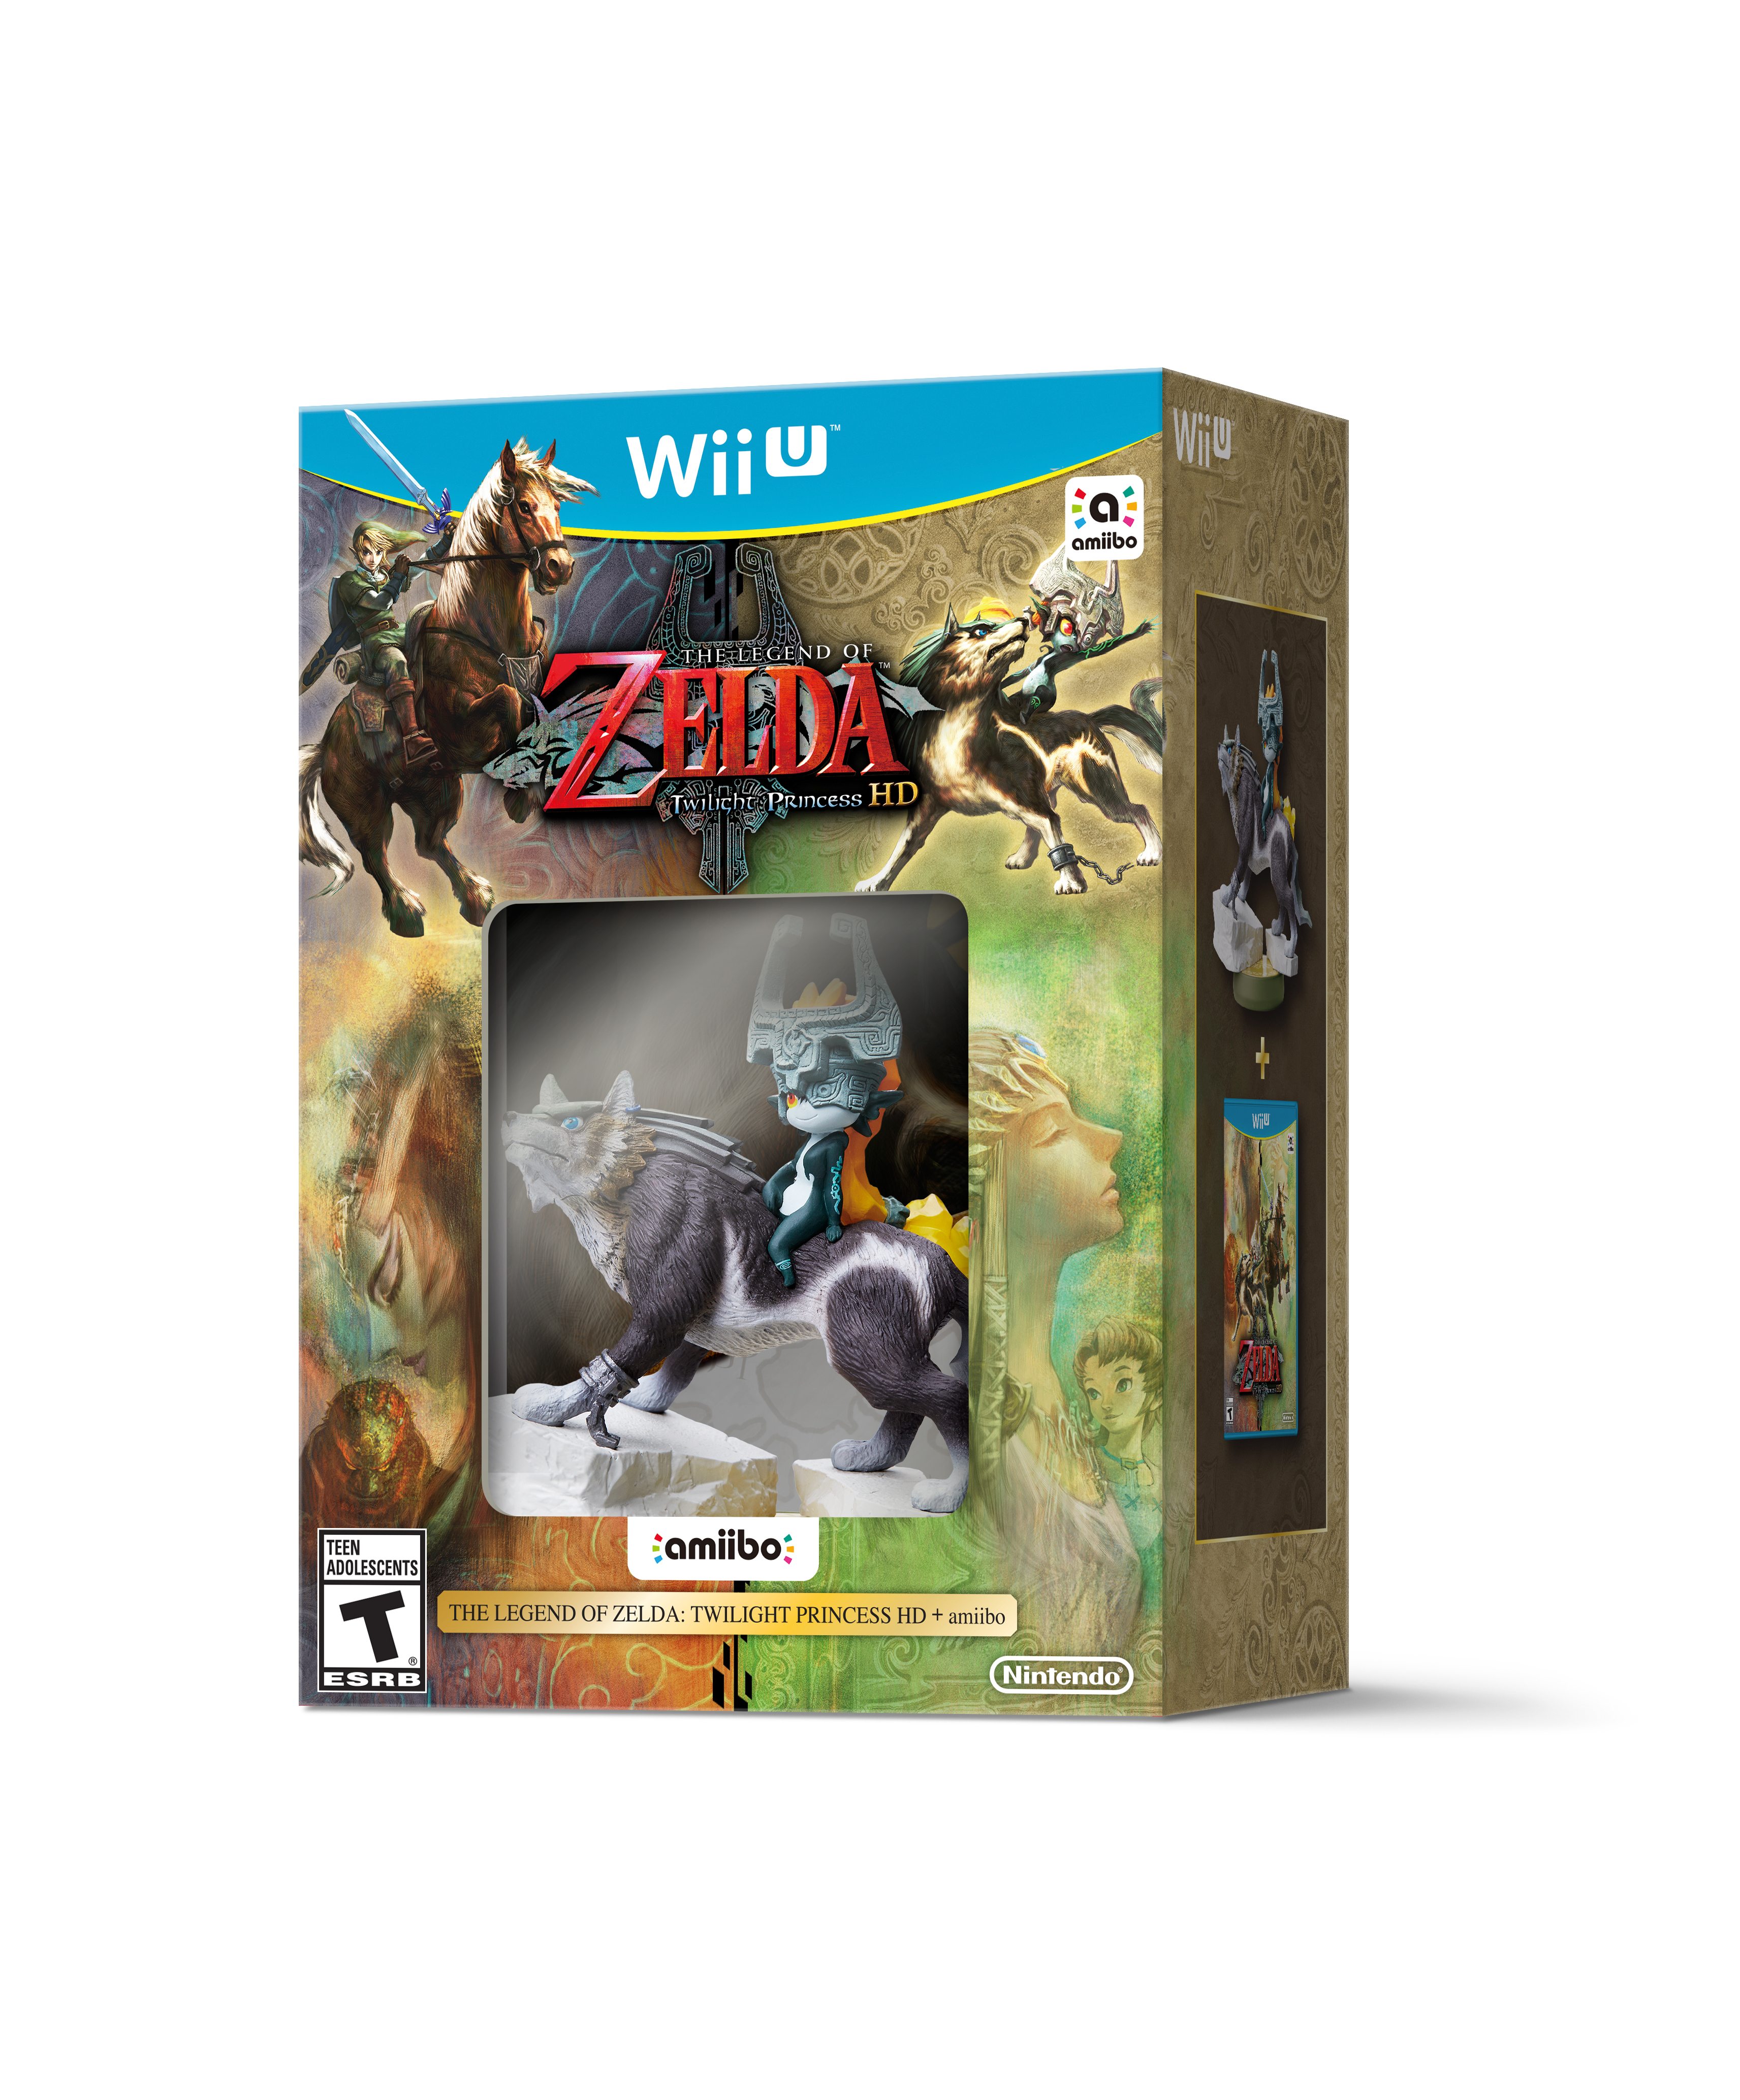 Nintendo Brings New Amiibo Figures And Functionality To Games In Early 16 Business Wire